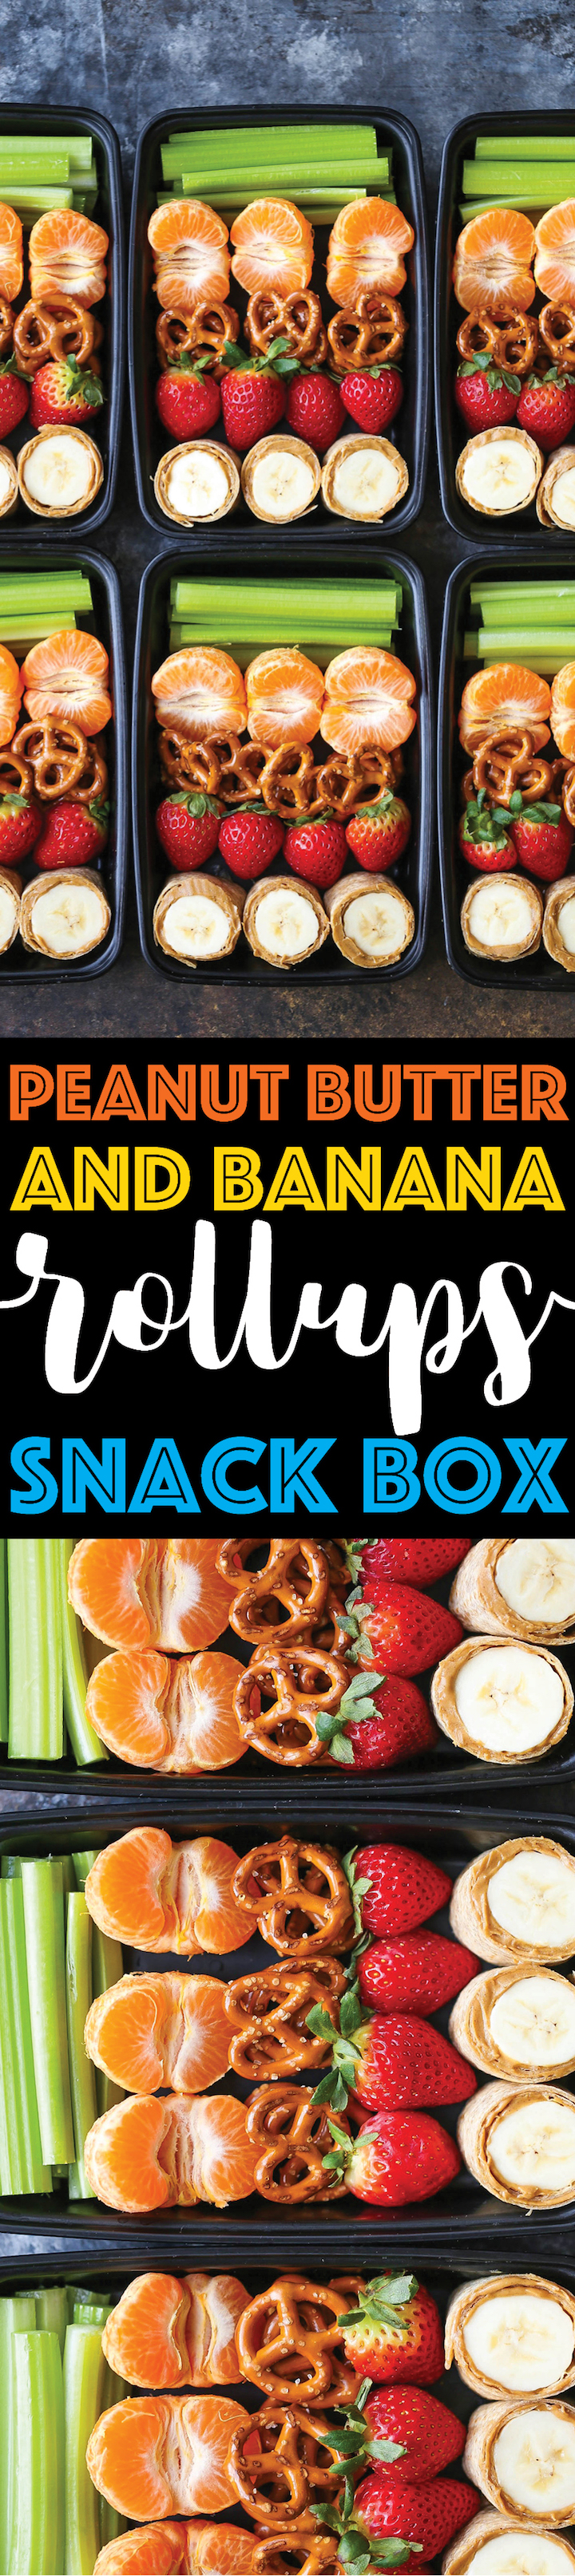 Peanut Butter and Banana Roll Ups Snack Box - These quick wraps are so much fun and easy, packed with strawberries, pretzels, tangerines and celery sticks!